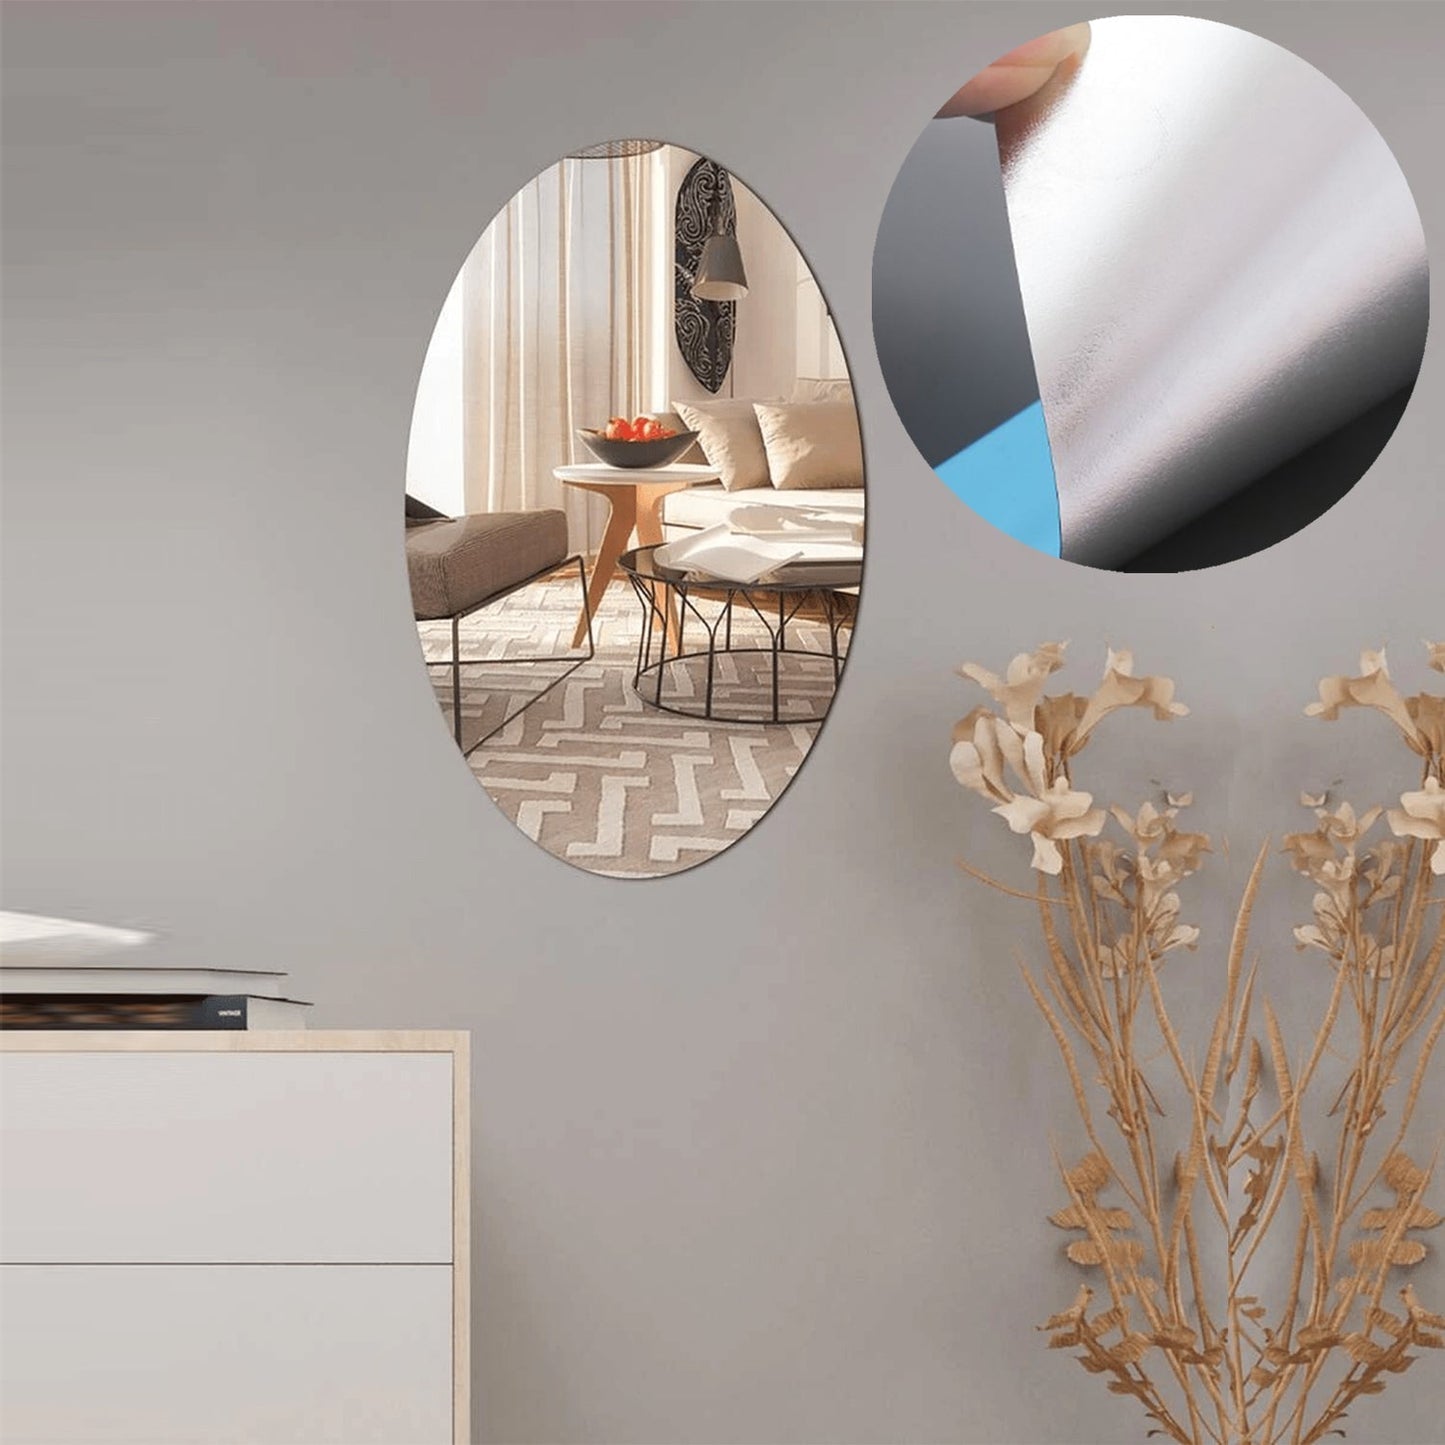 1795 Oval Shape 3D Mirror Sticker used in all kinds of household and official purposes as a sticker etc.